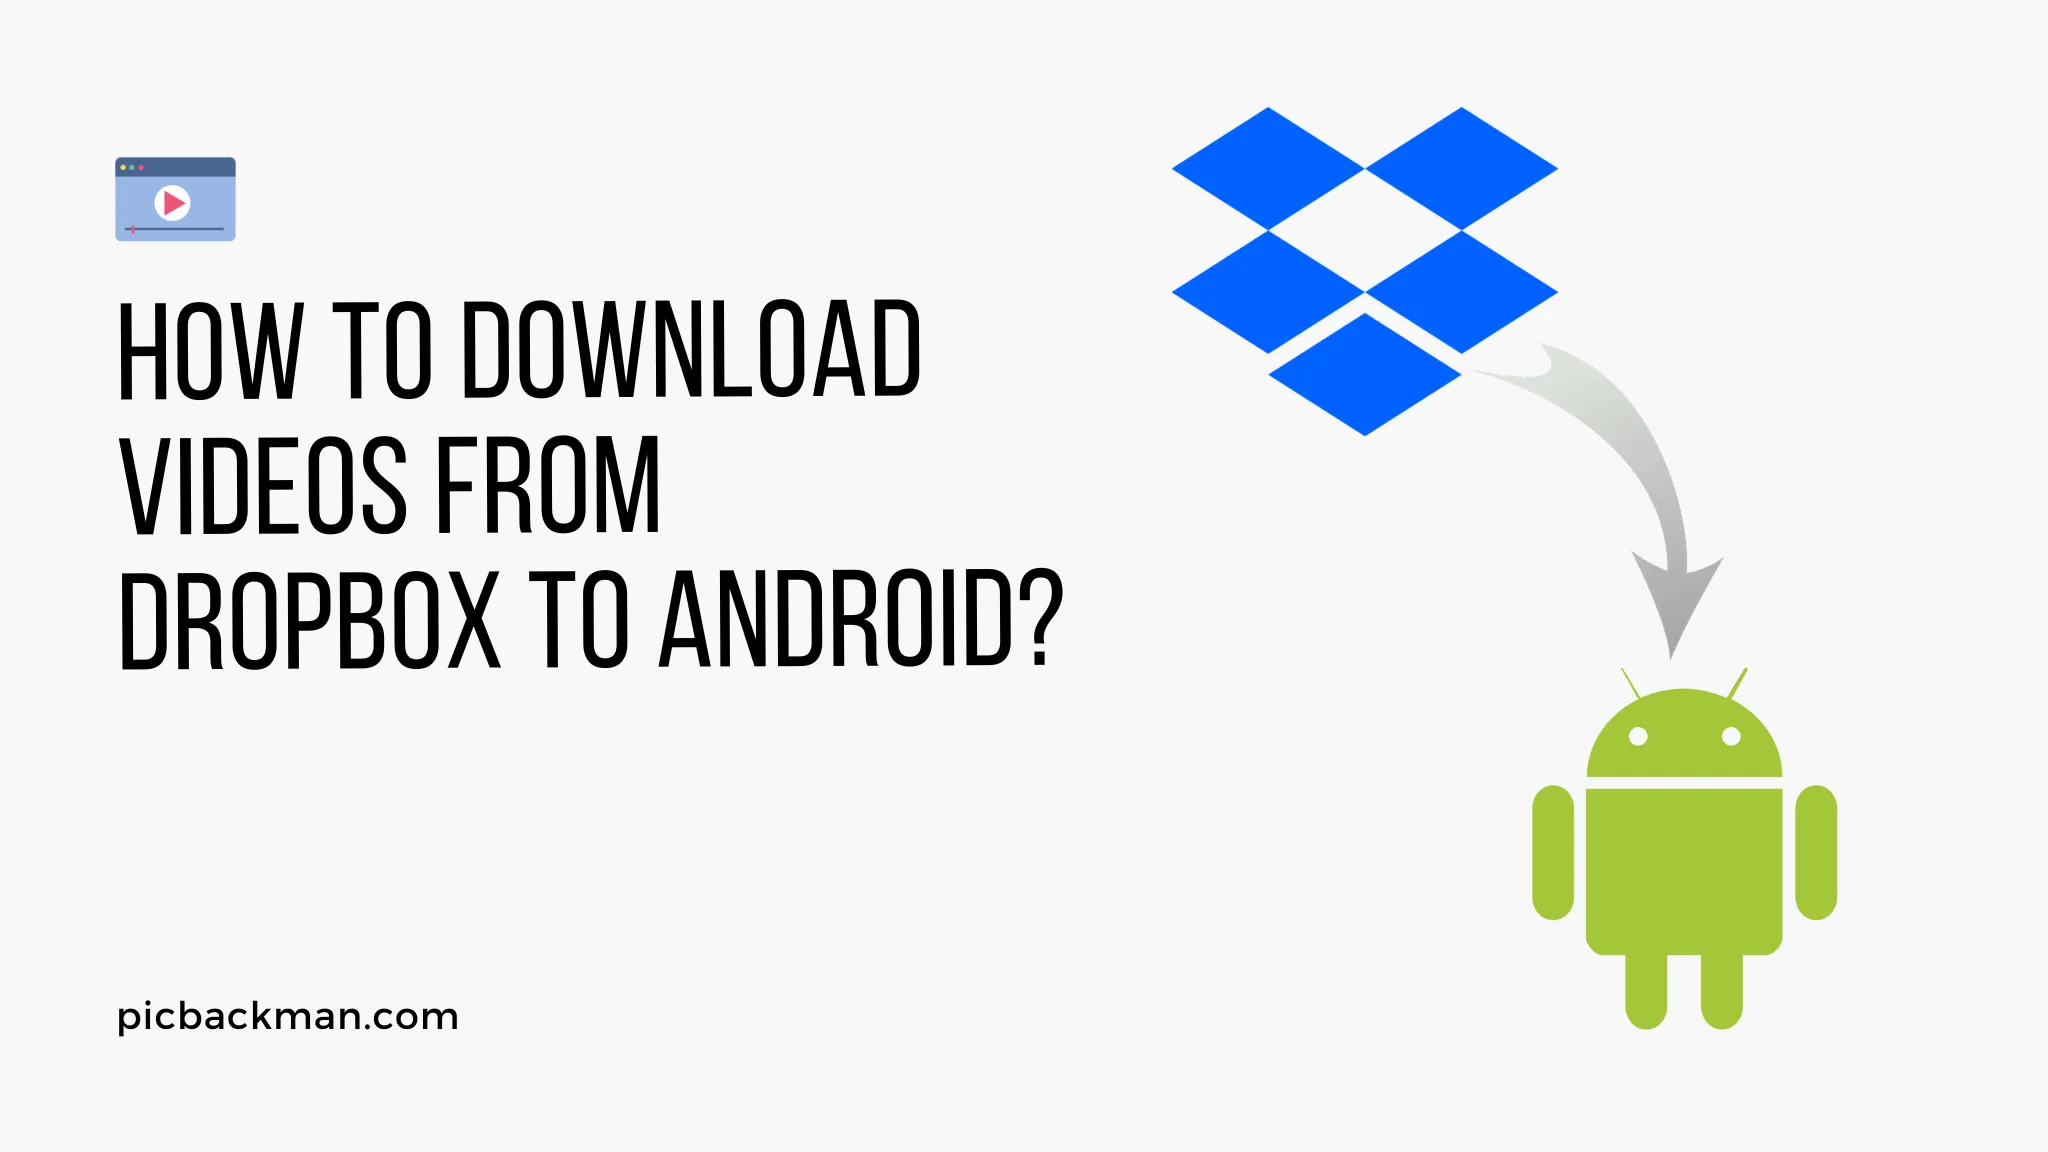 How to download videos from Dropbox to Android?